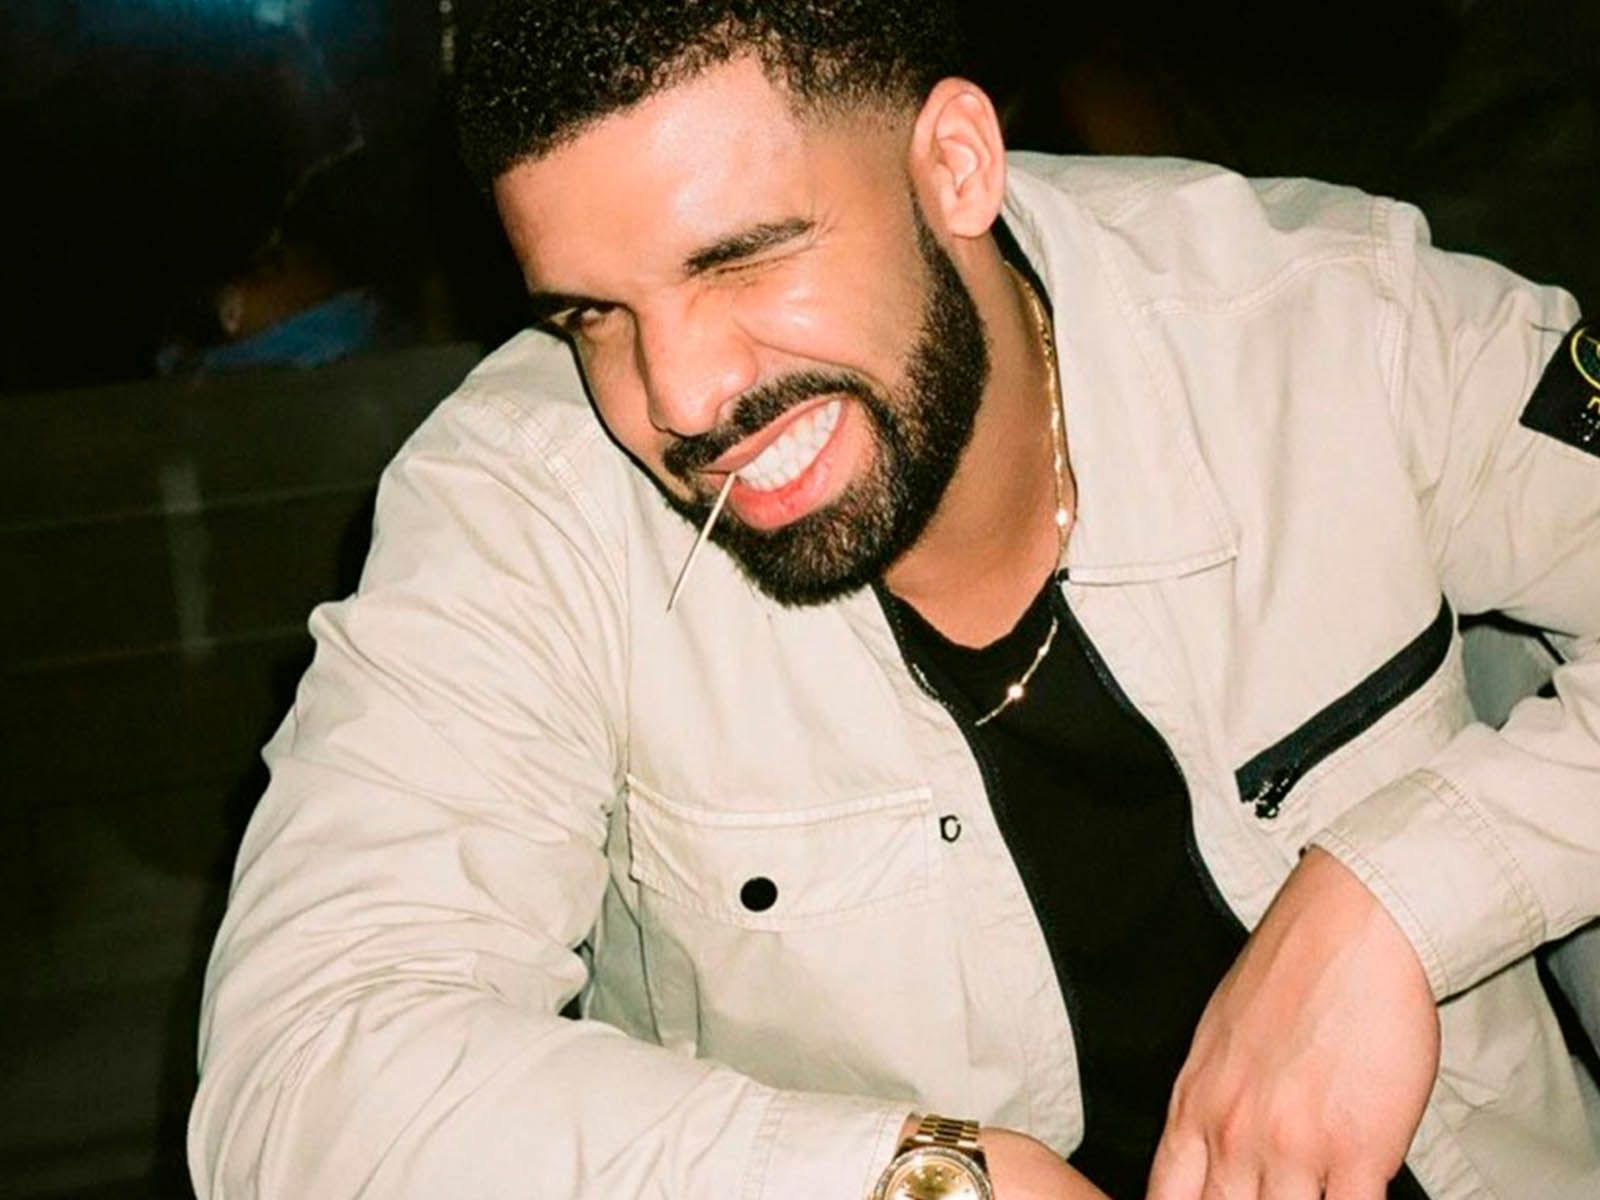 Drake song drafts to be auctioned off